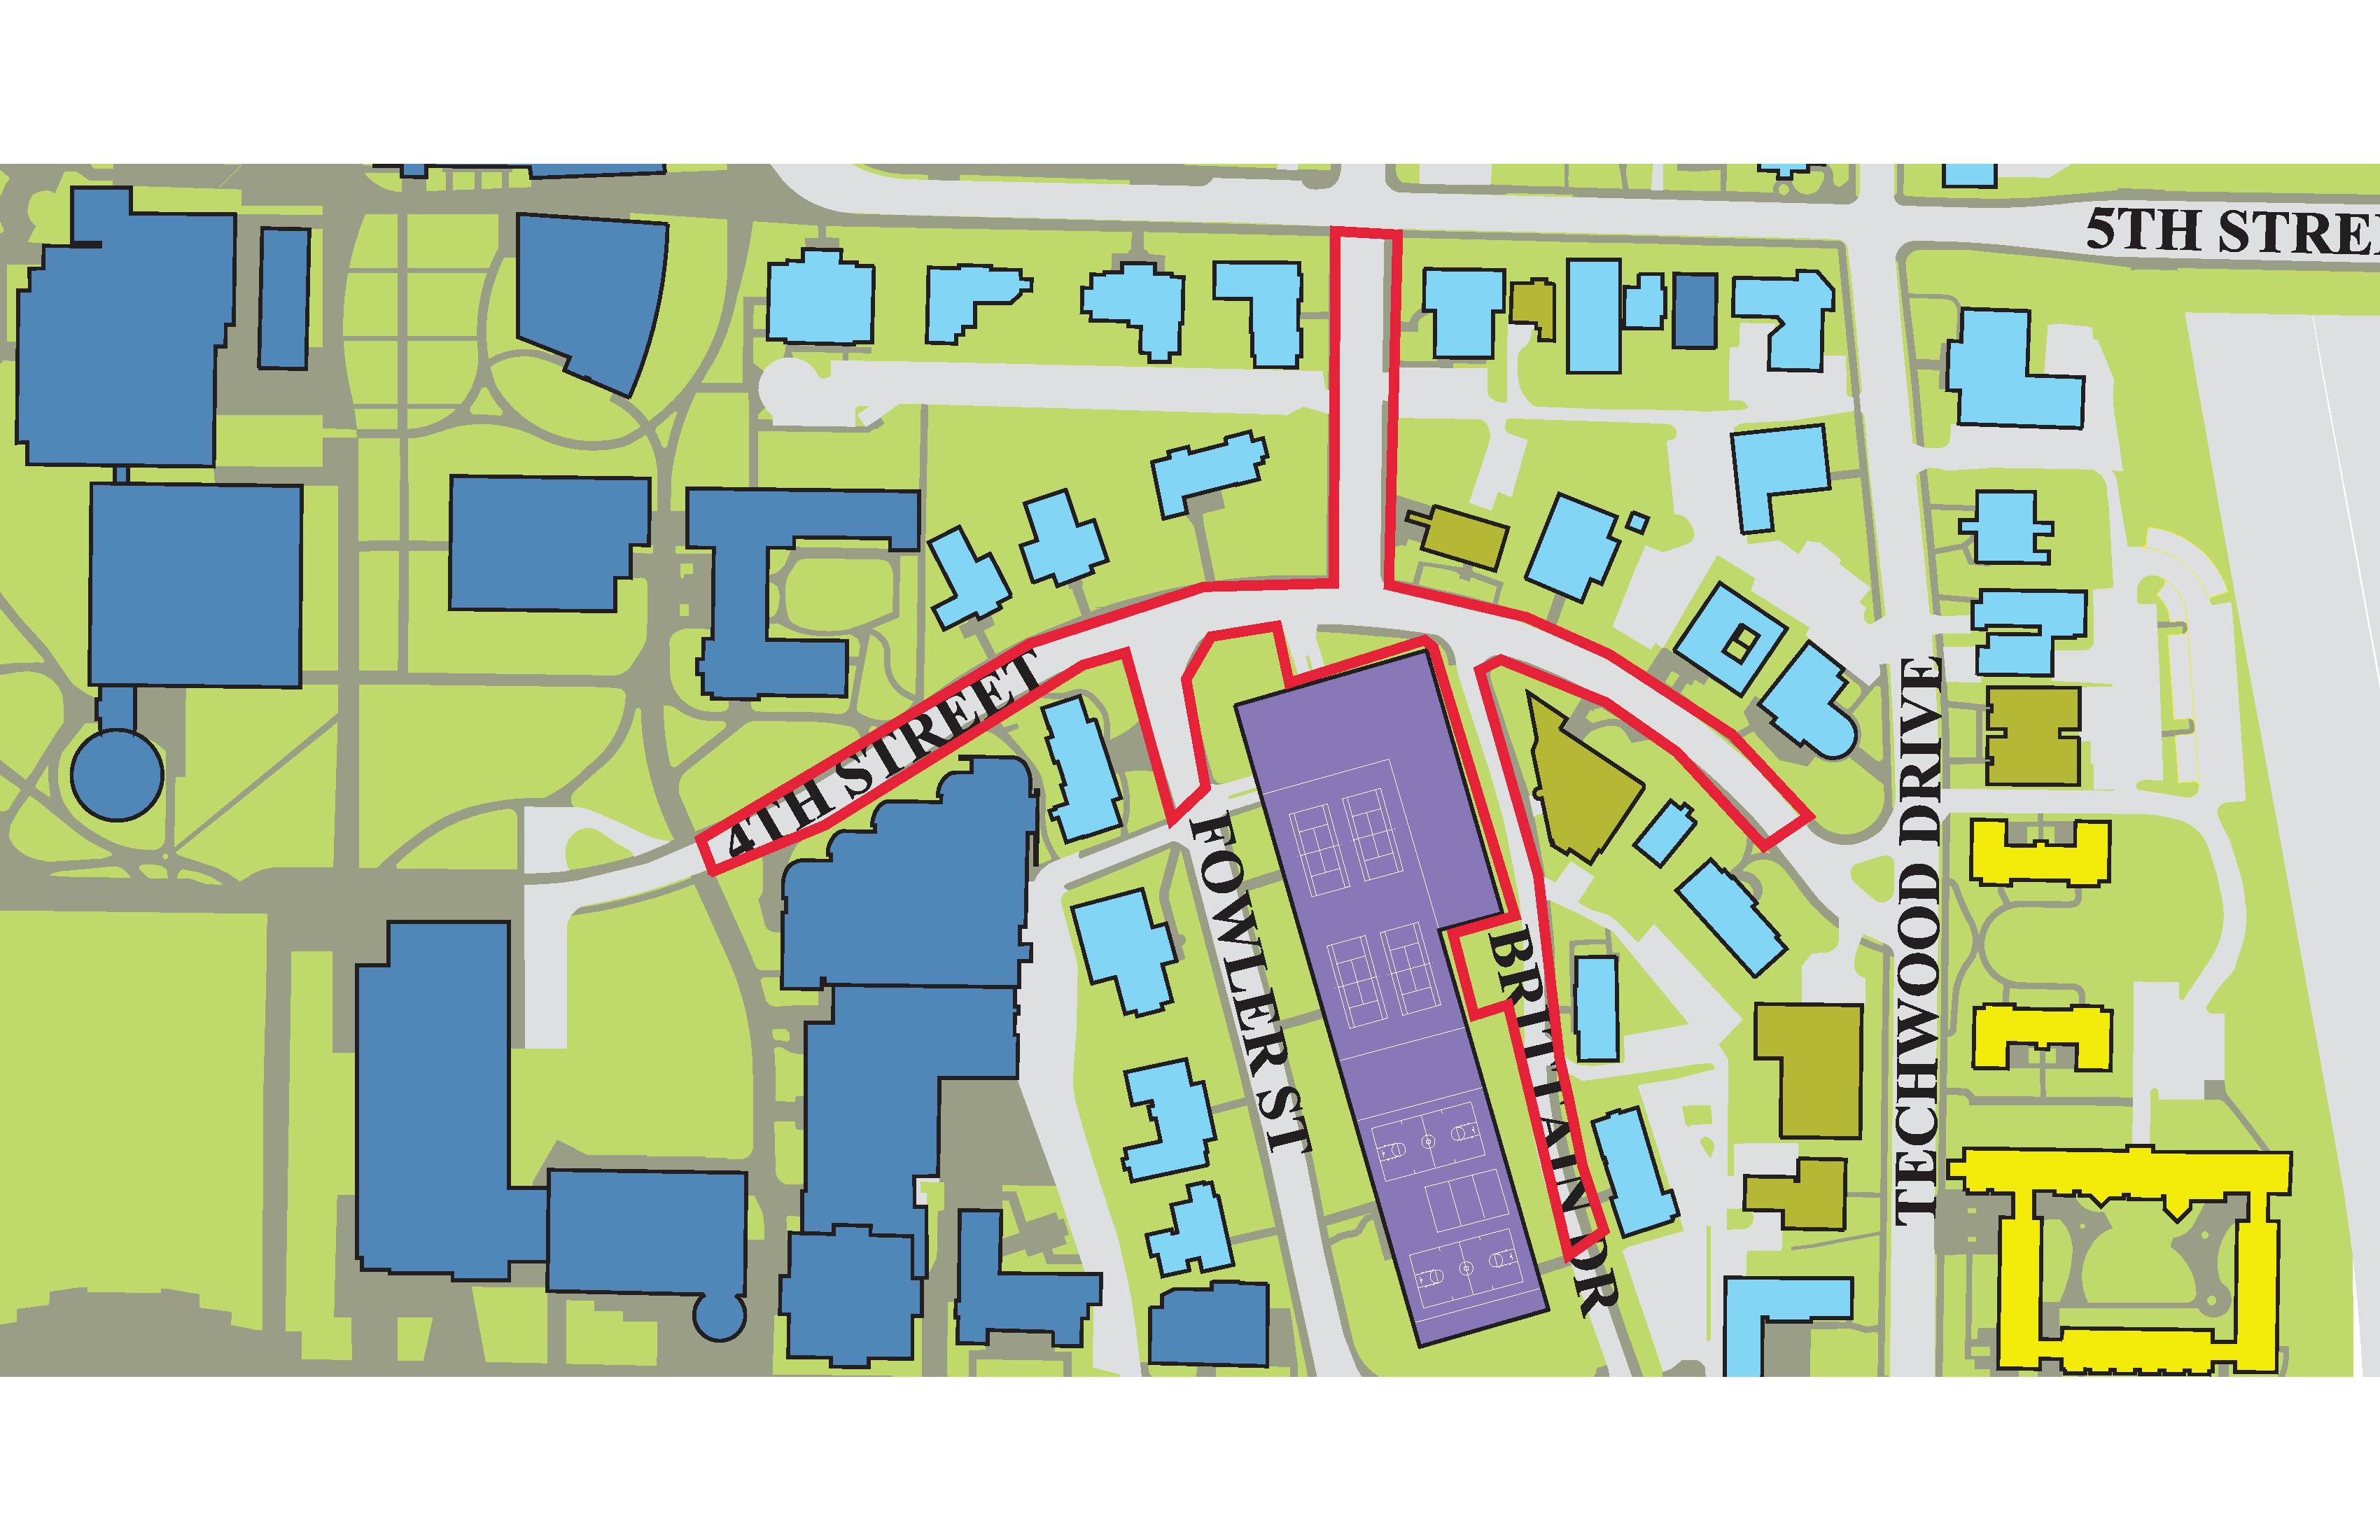 East campus streetscape phase 1 areas.
